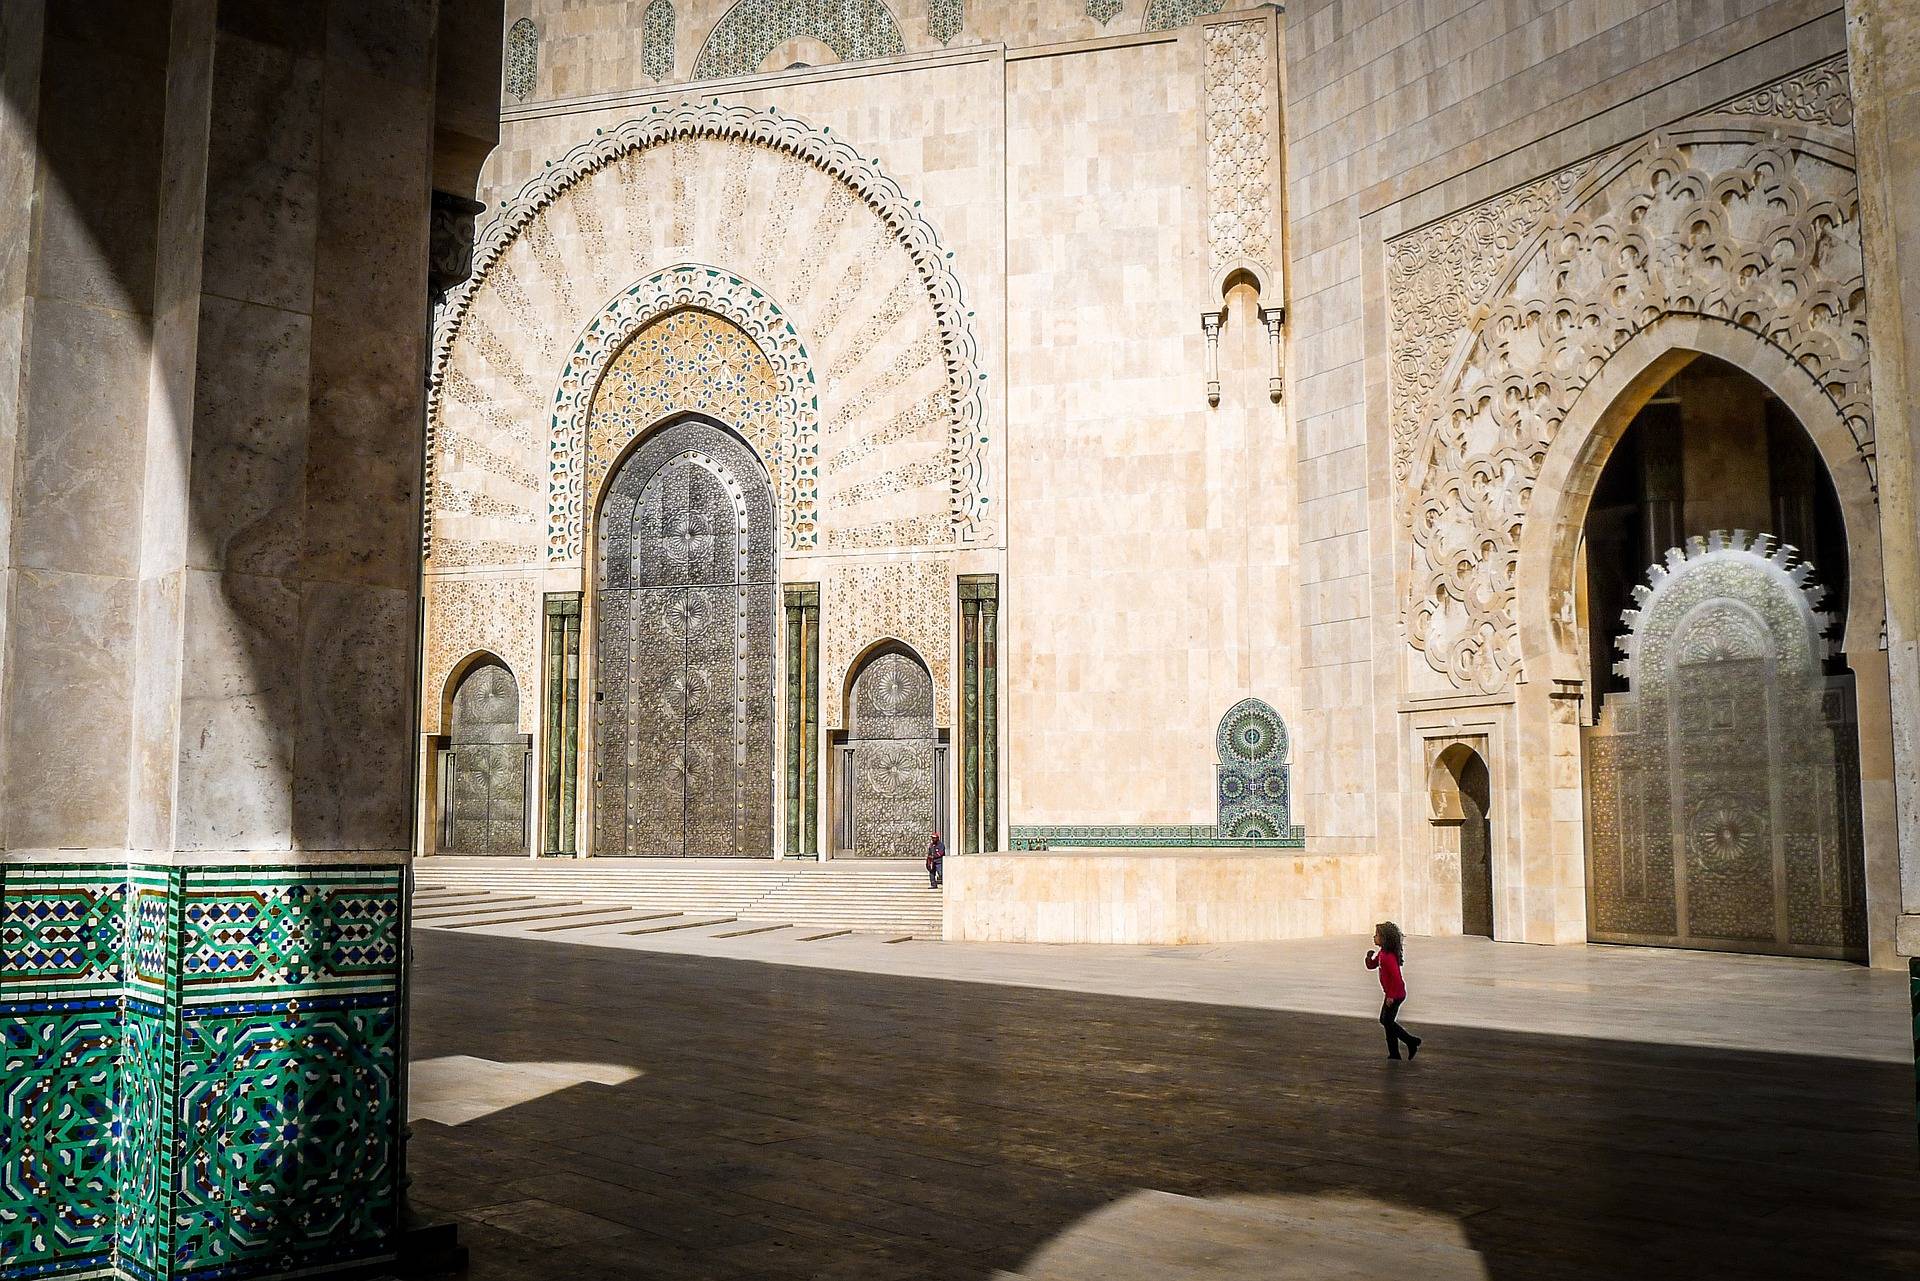 mosque hassan gbd4be1282 1920 - Morocco Private Tours | Morocco Guided Tour | Morocco Tours